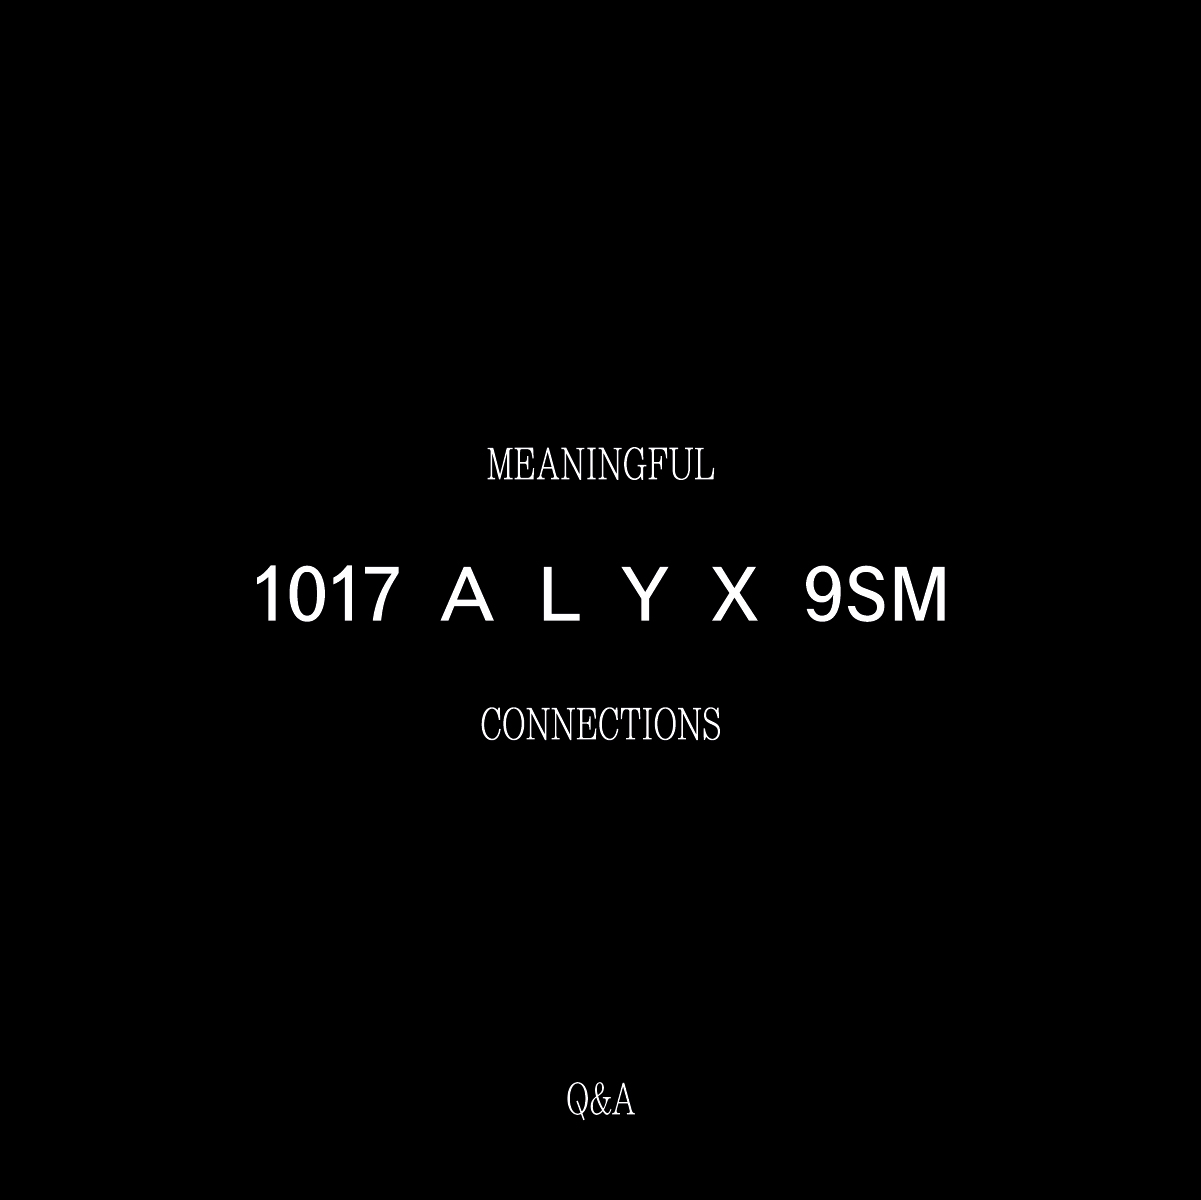 1017 ALYX 9SM Meaningful Connections Q&A